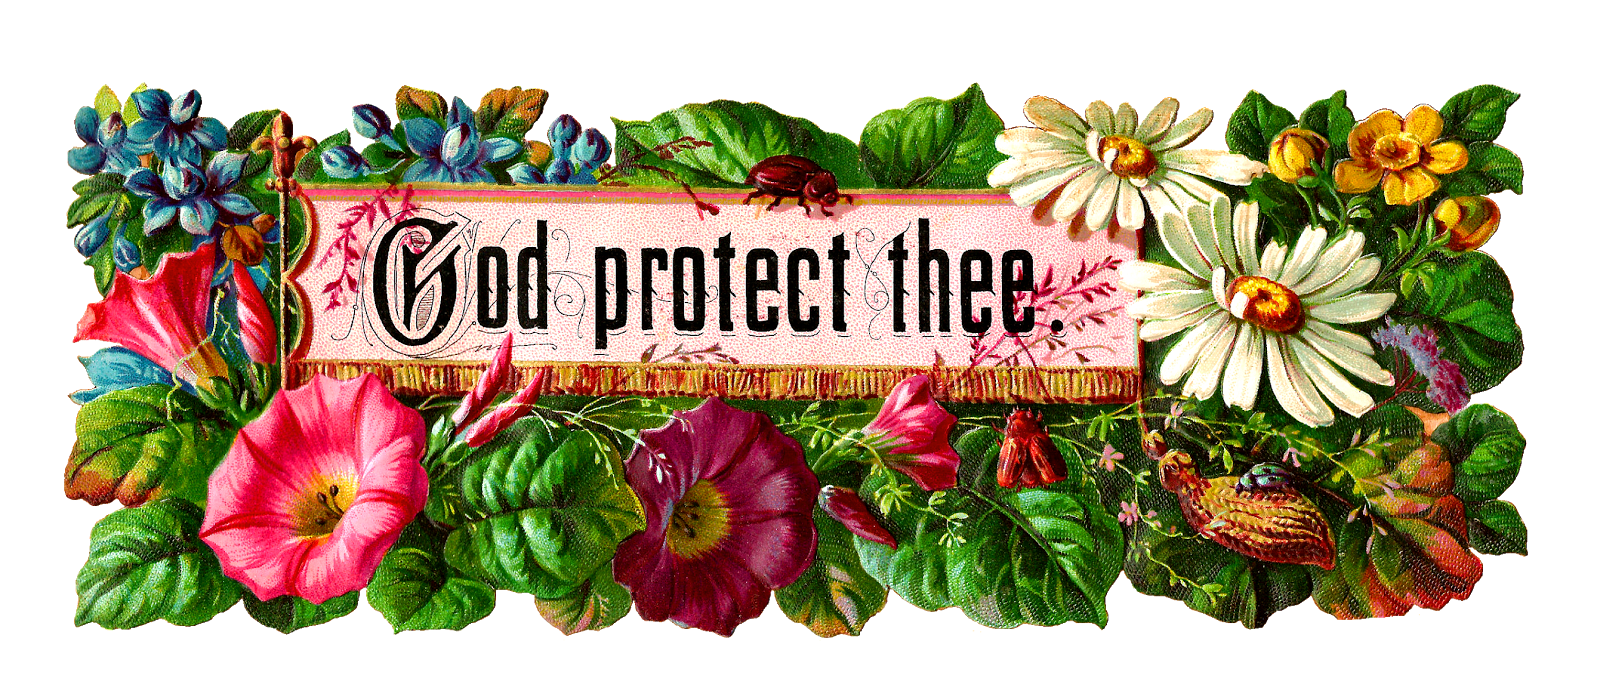 Antique Images  Free Flower Clip Art  Religious Flower Label With God